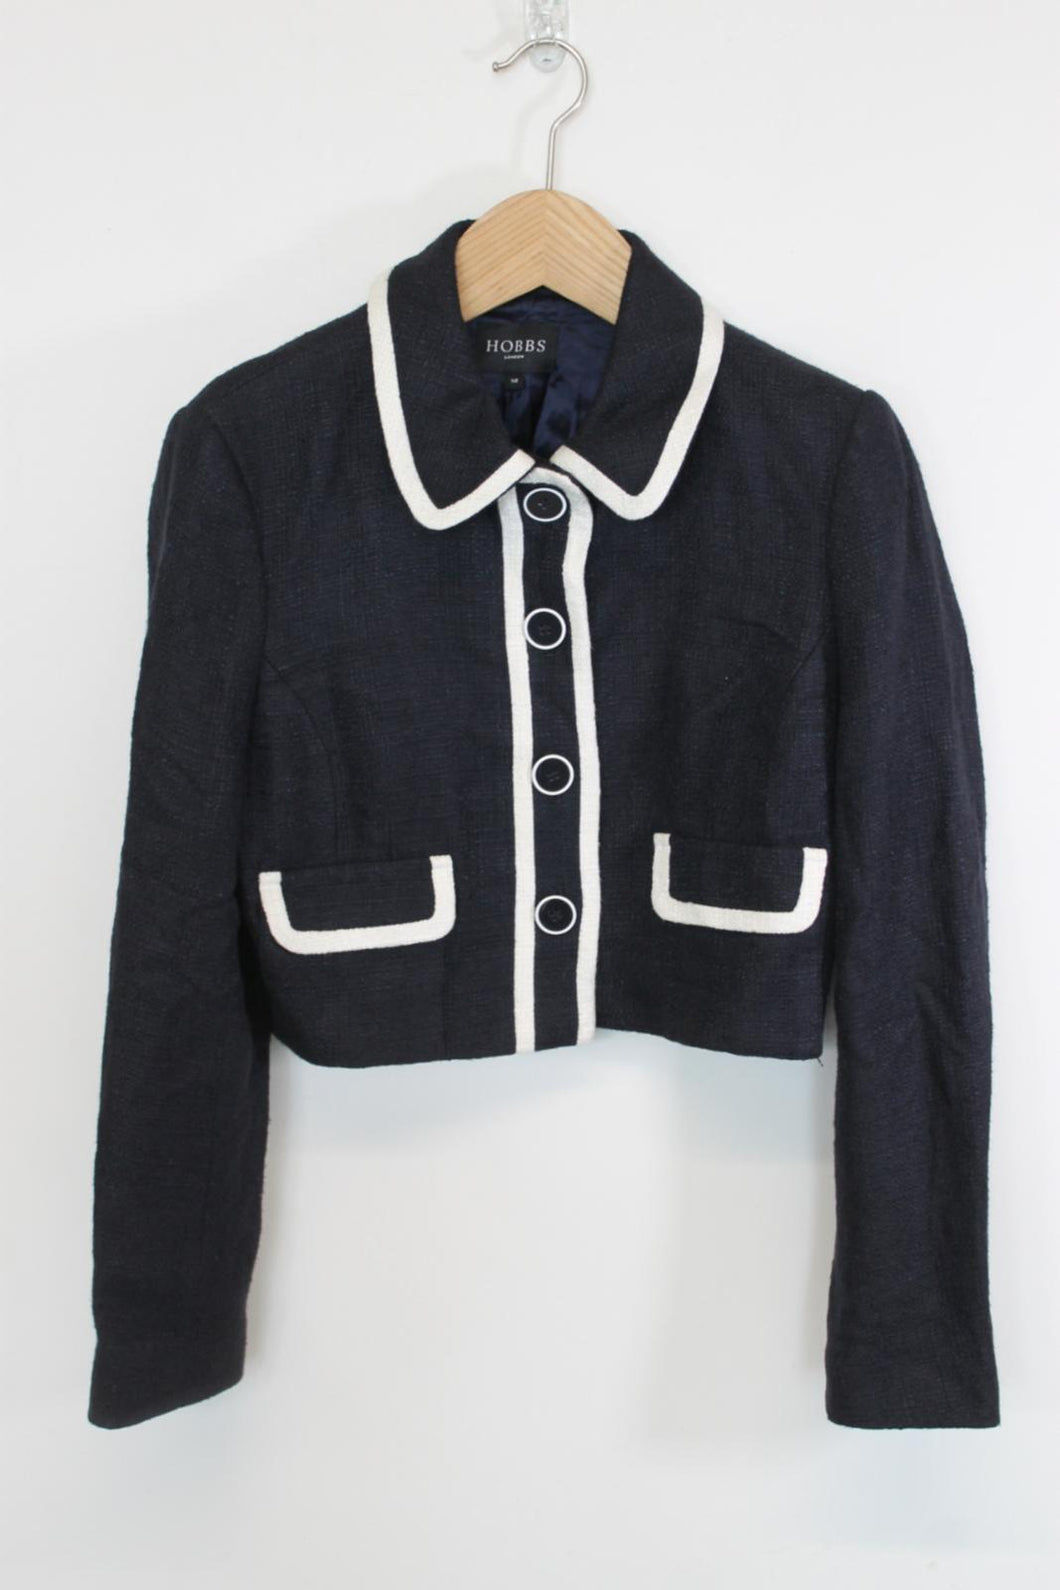 HOBBS Ladies Navy Blue Cropped Collared Long Sleeve Button Down Jacket EU40 UK12